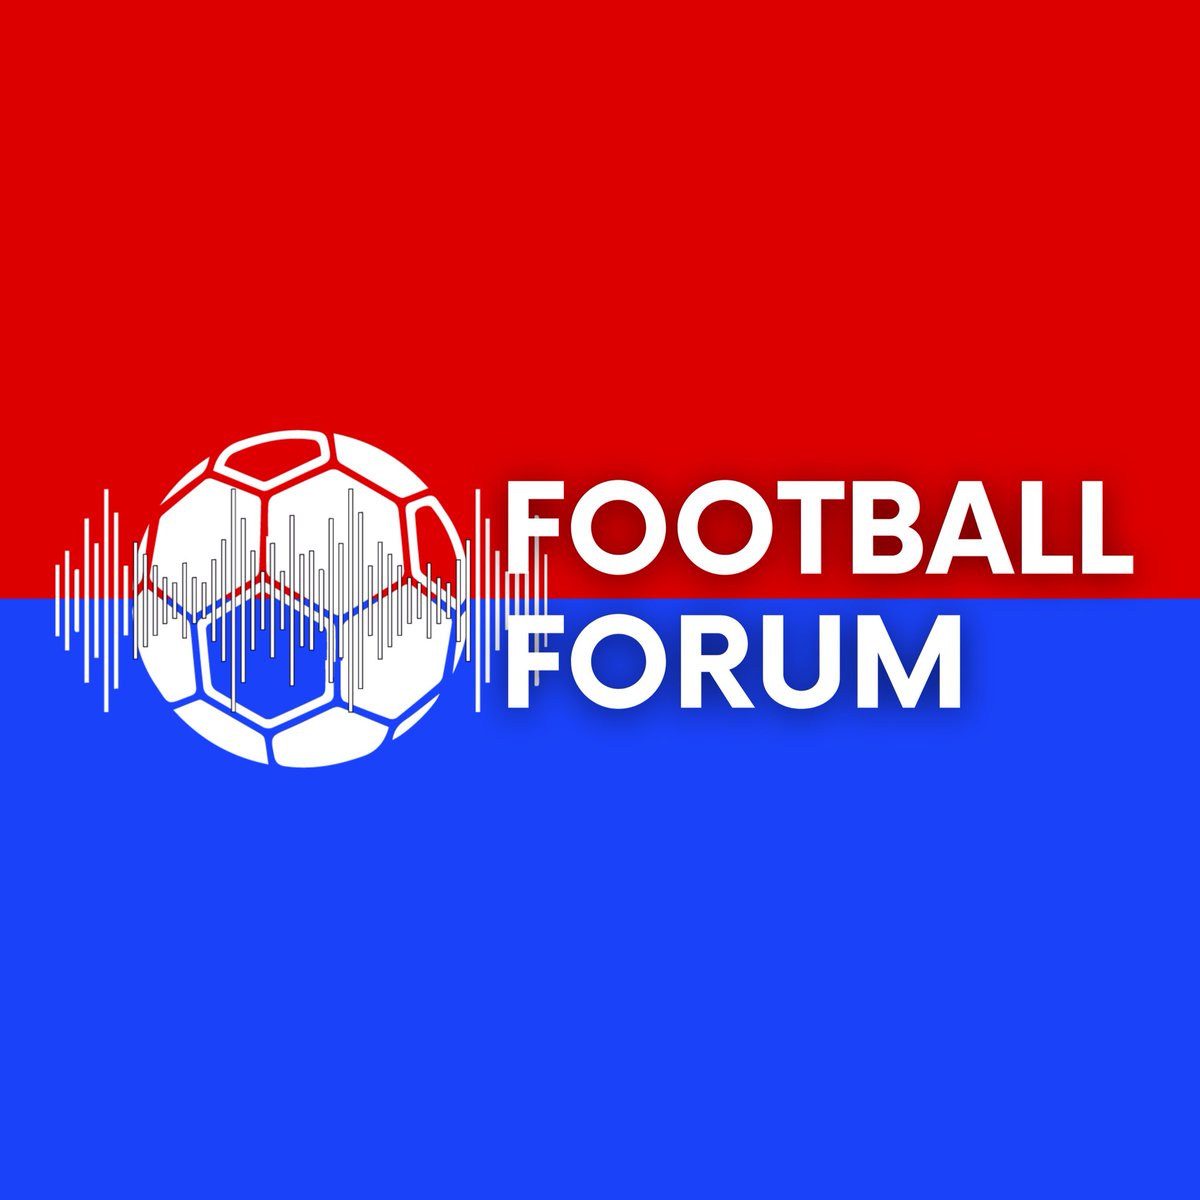 This account will continue to be monitored and will remain active, despite the conclusion of the programme.

#FootballForum